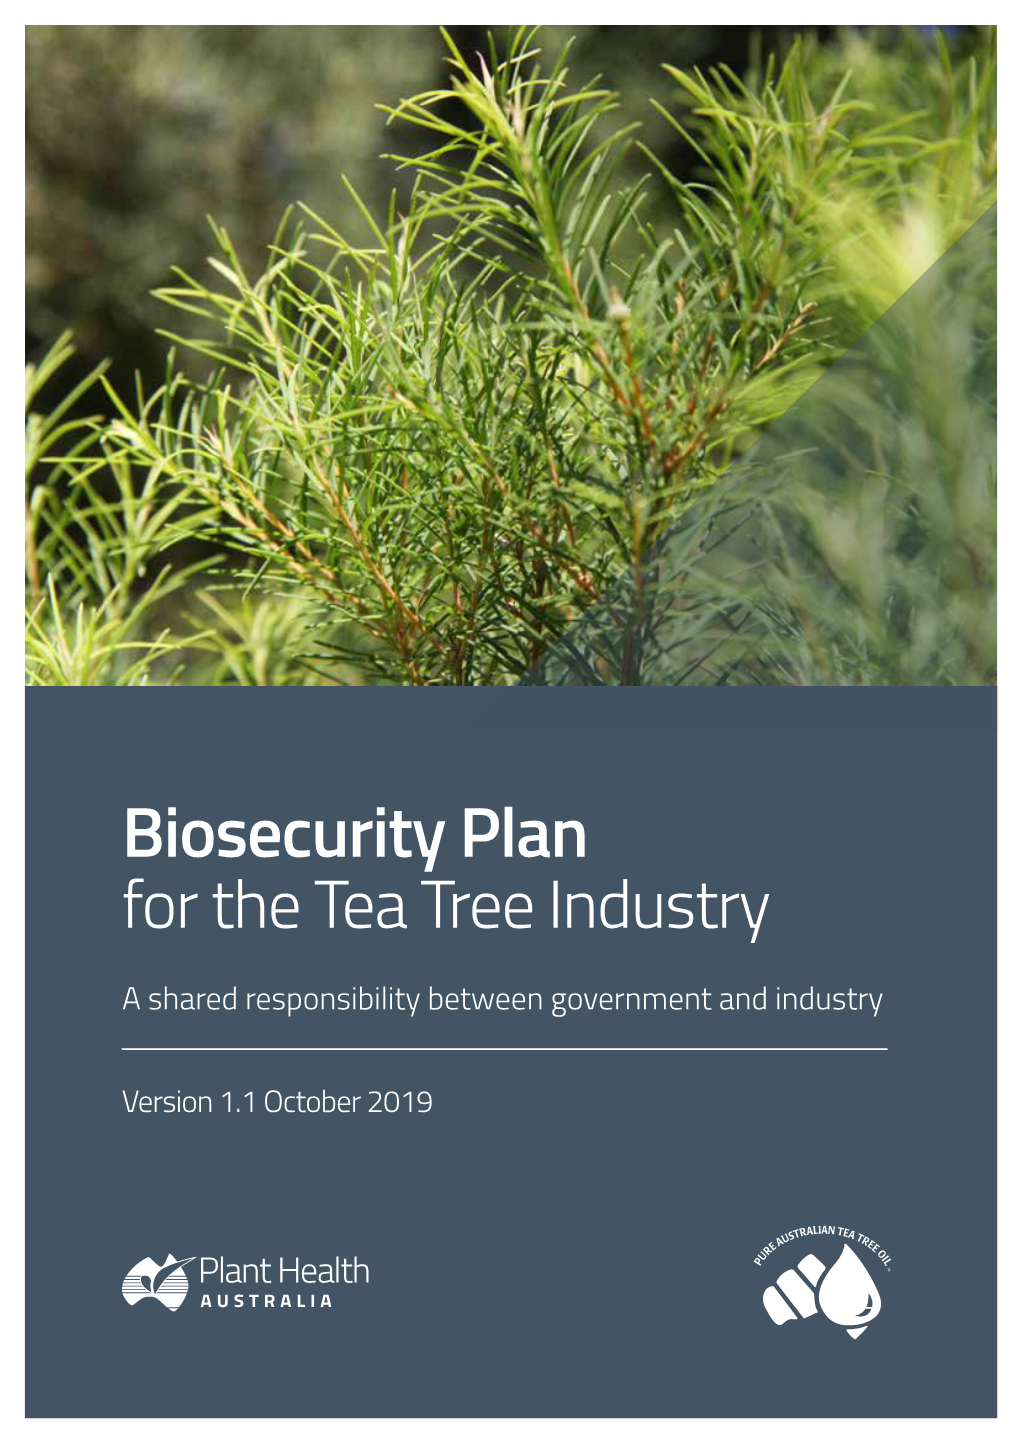 Biosecurity Plan for the Tea Tree Industry 2019.Pdf